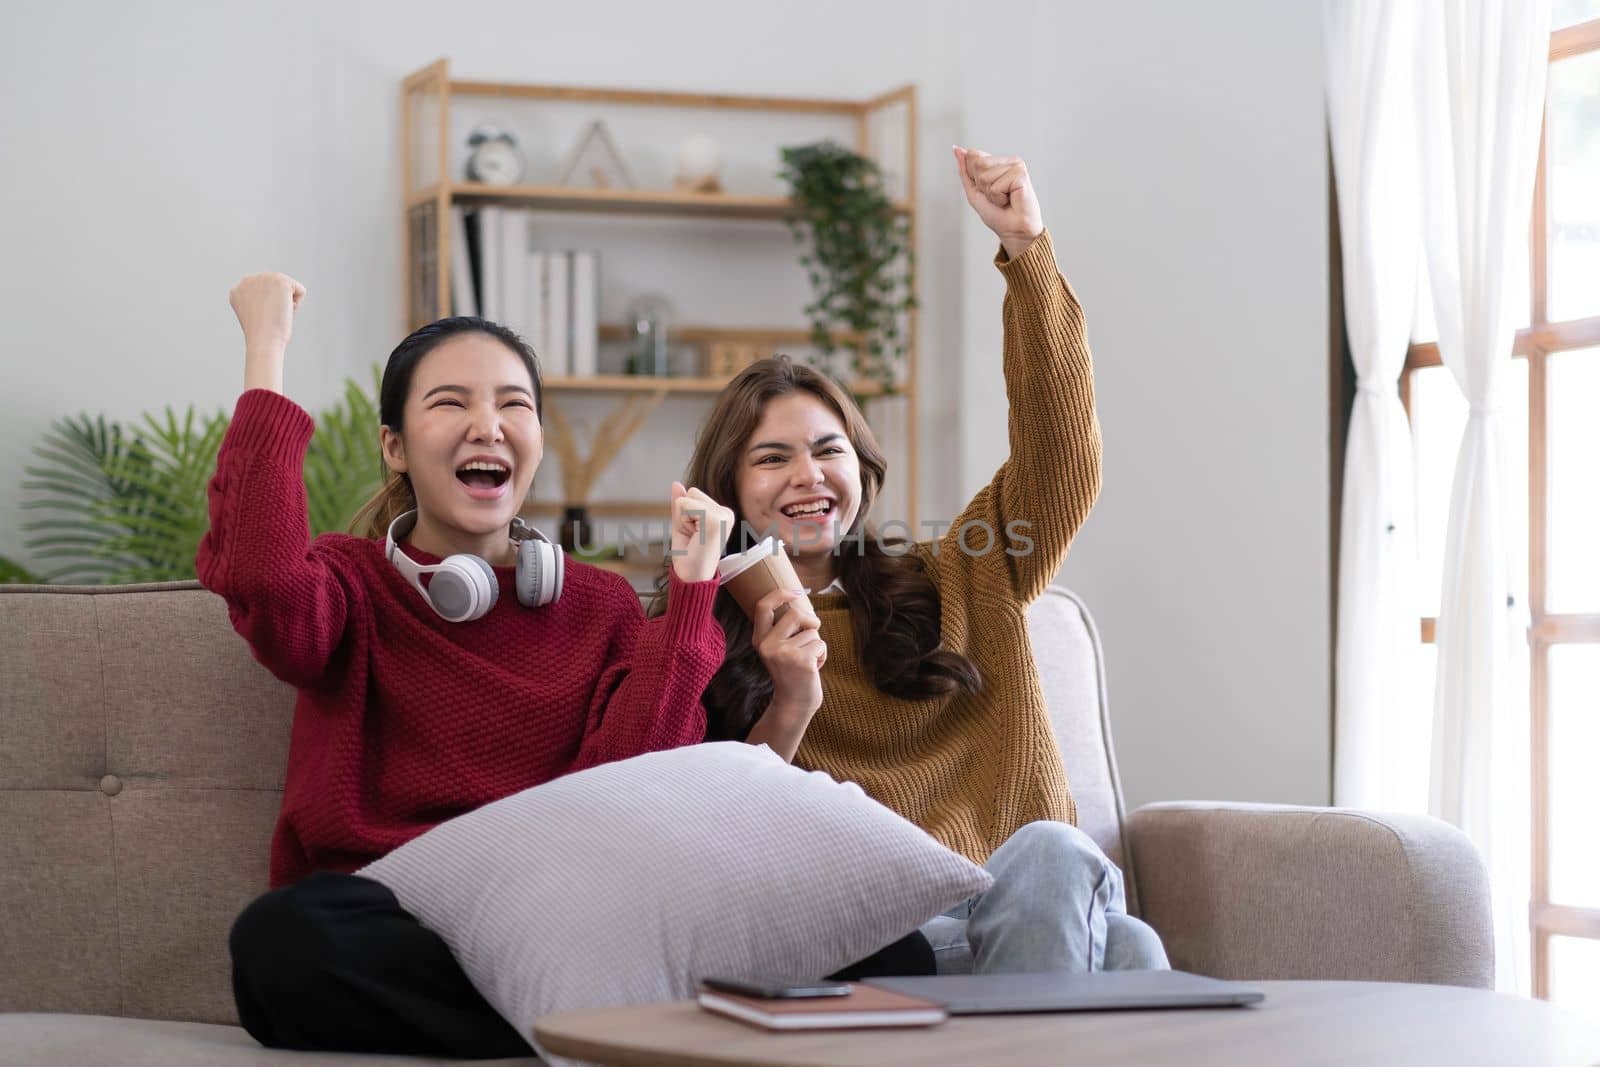 Two Young womanWatching TV Shaking Fists In Joy Celebrating Victory Of Favorite Sport Team Sitting On Couch In Living Room At Home. Weekend Leisure, Television Show And Entertainment Concept by wichayada